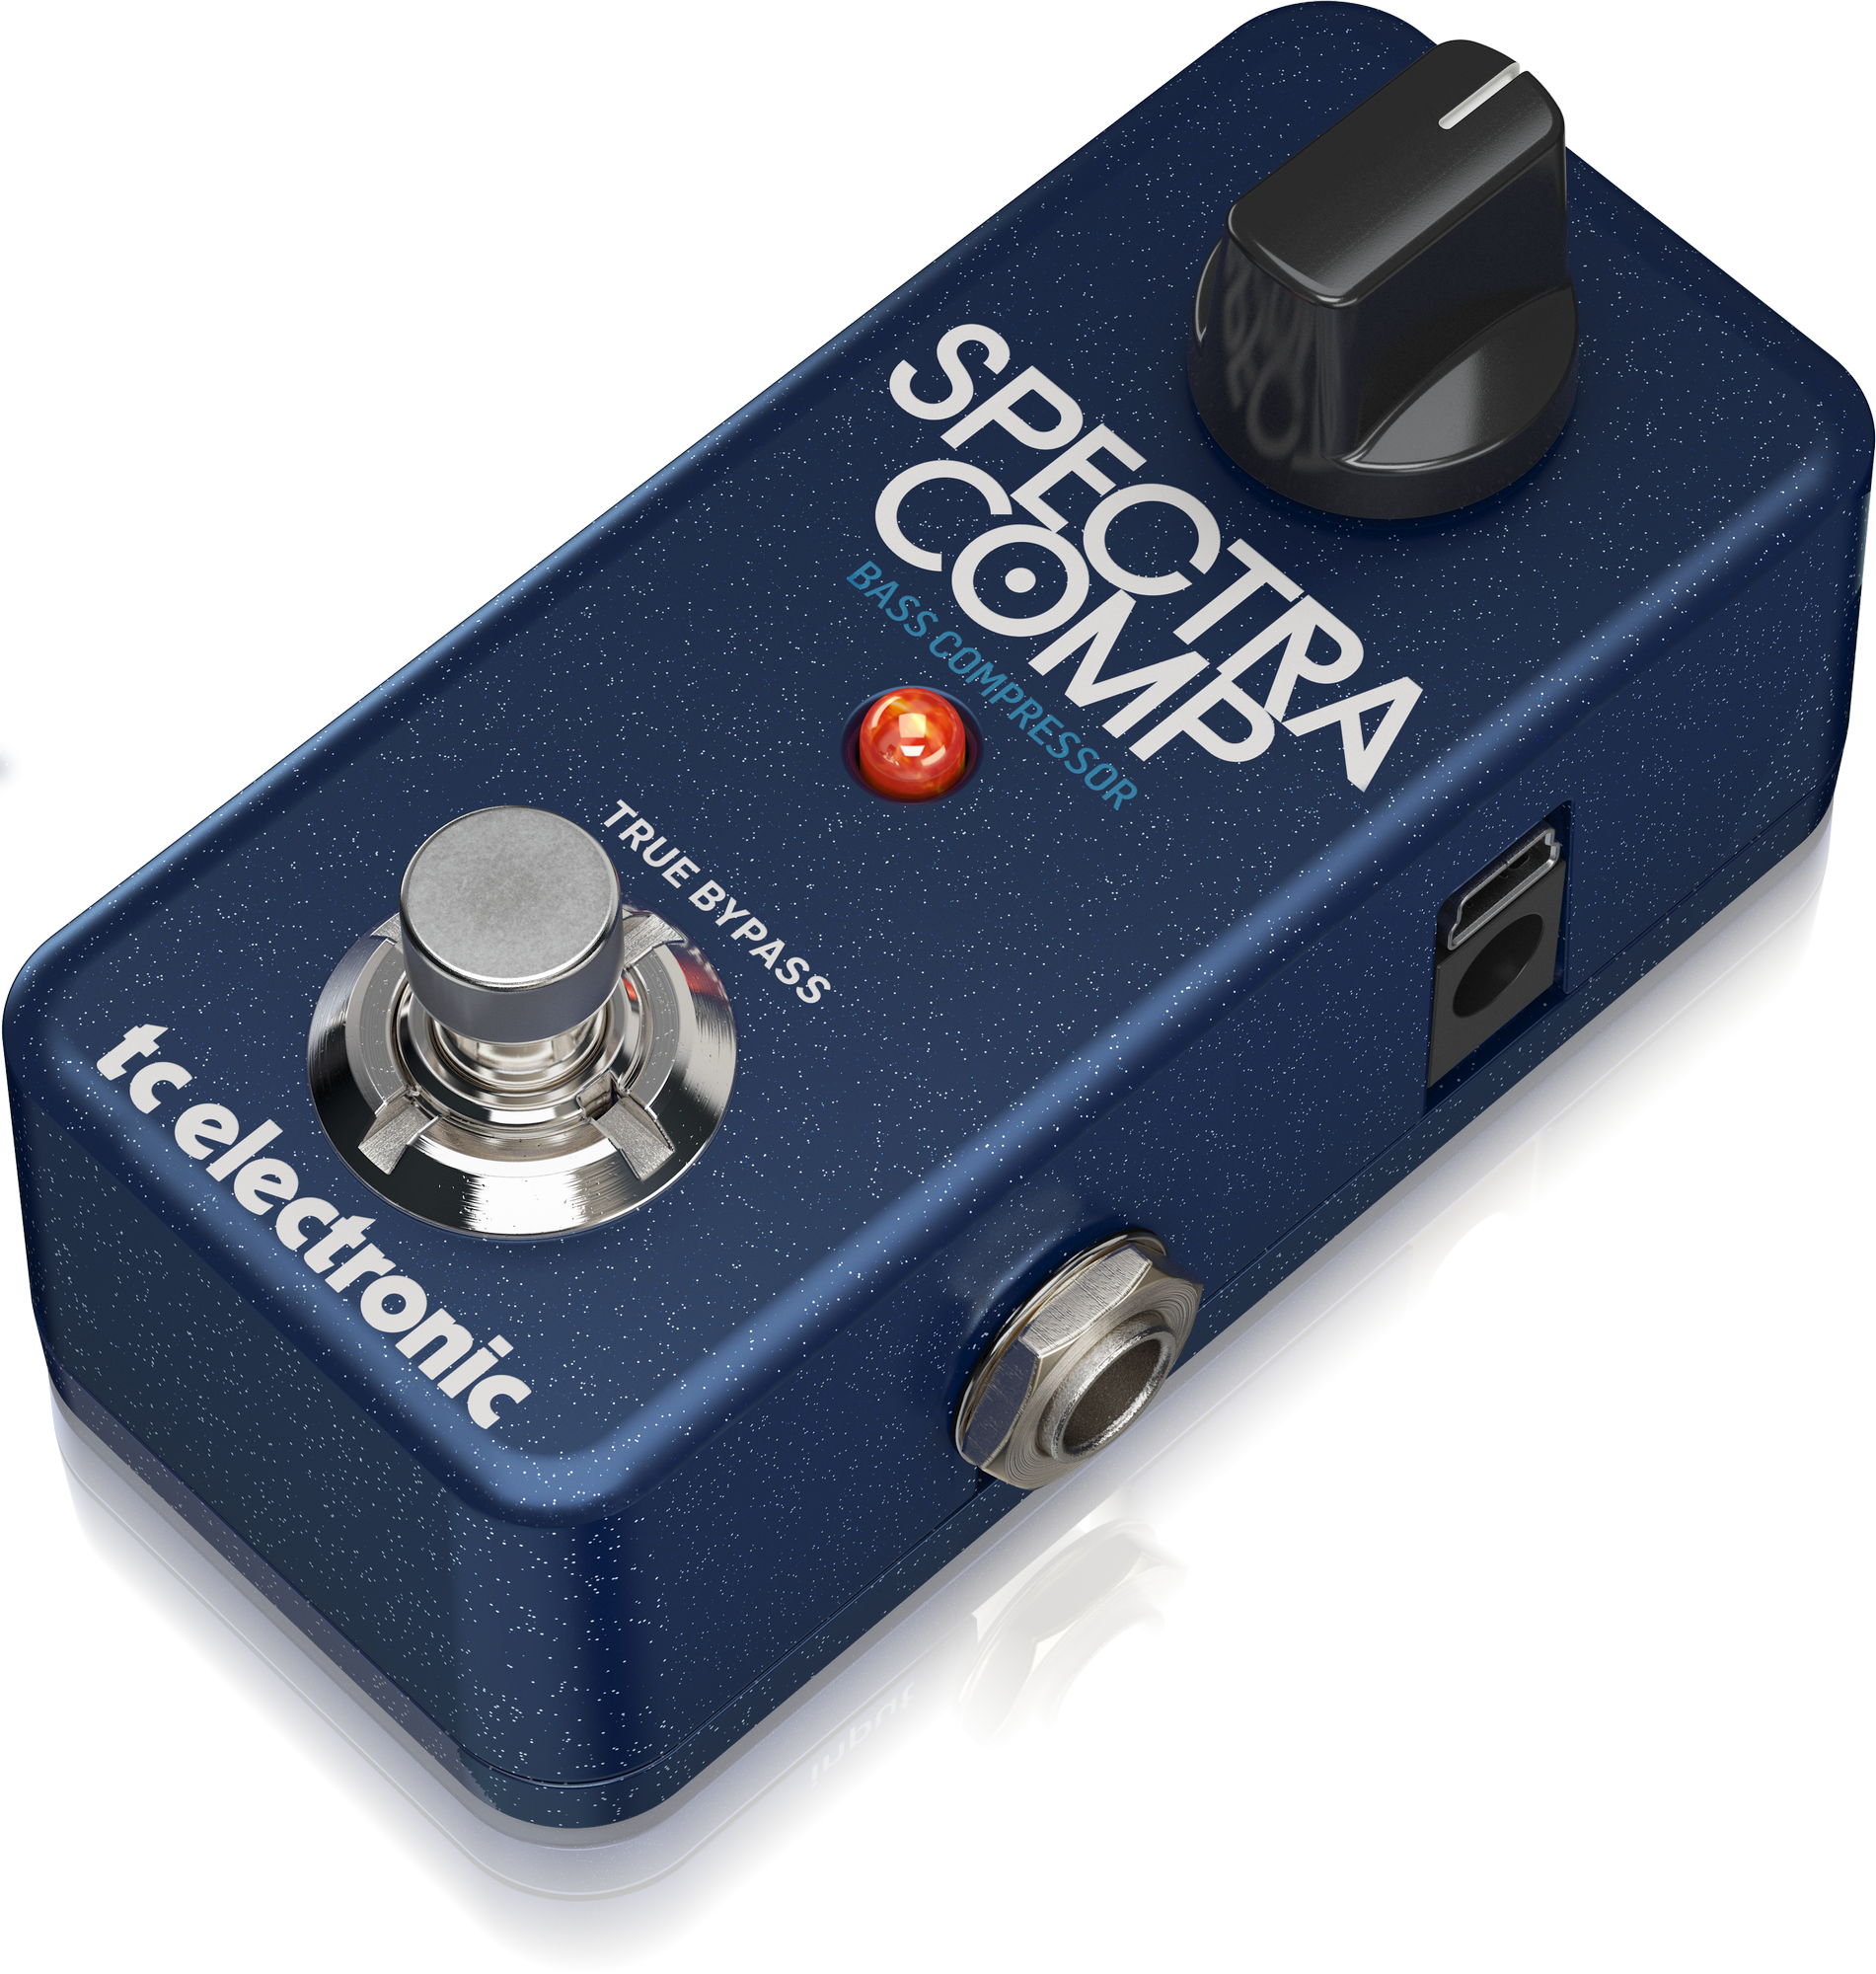 TC Electronic Spectracomp Bass Compressor Ultra-compact Multiband Compression Pedal For Bass With Built-in Toneprint Technology, TC ELECTRONIC, EFFECTS, tc-electronic-effects-tc-spectracomp-bass-compressor, ZOSO MUSIC SDN BHD